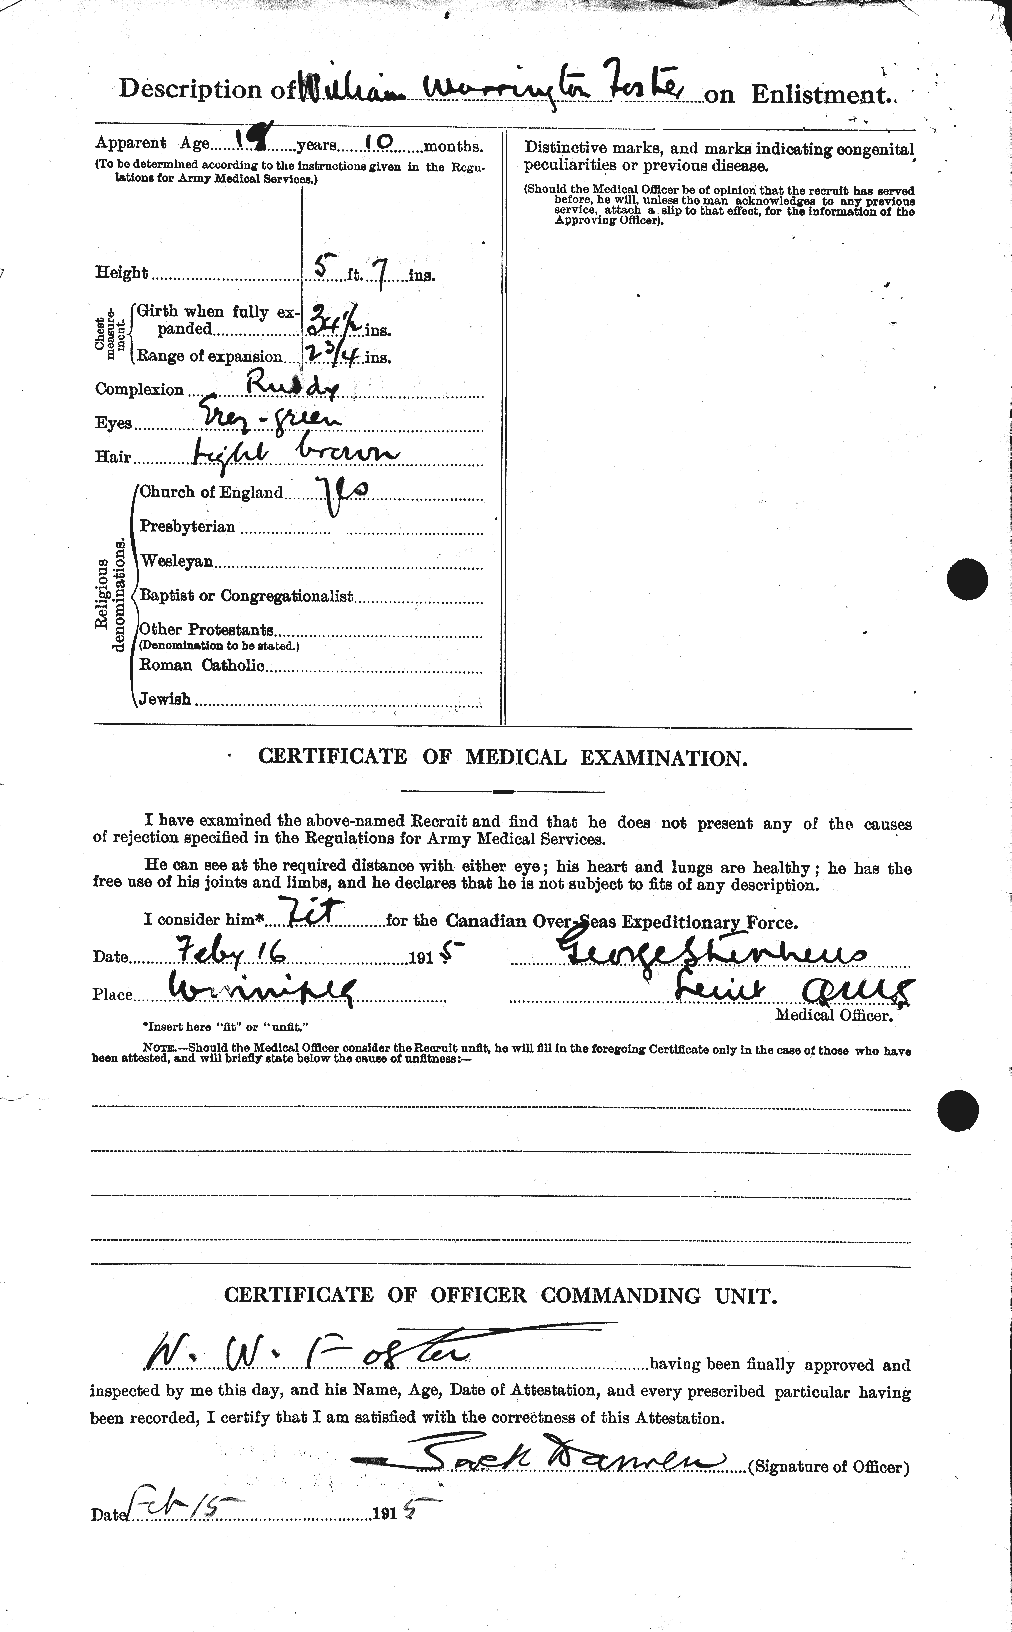 Personnel Records of the First World War - CEF 328775b